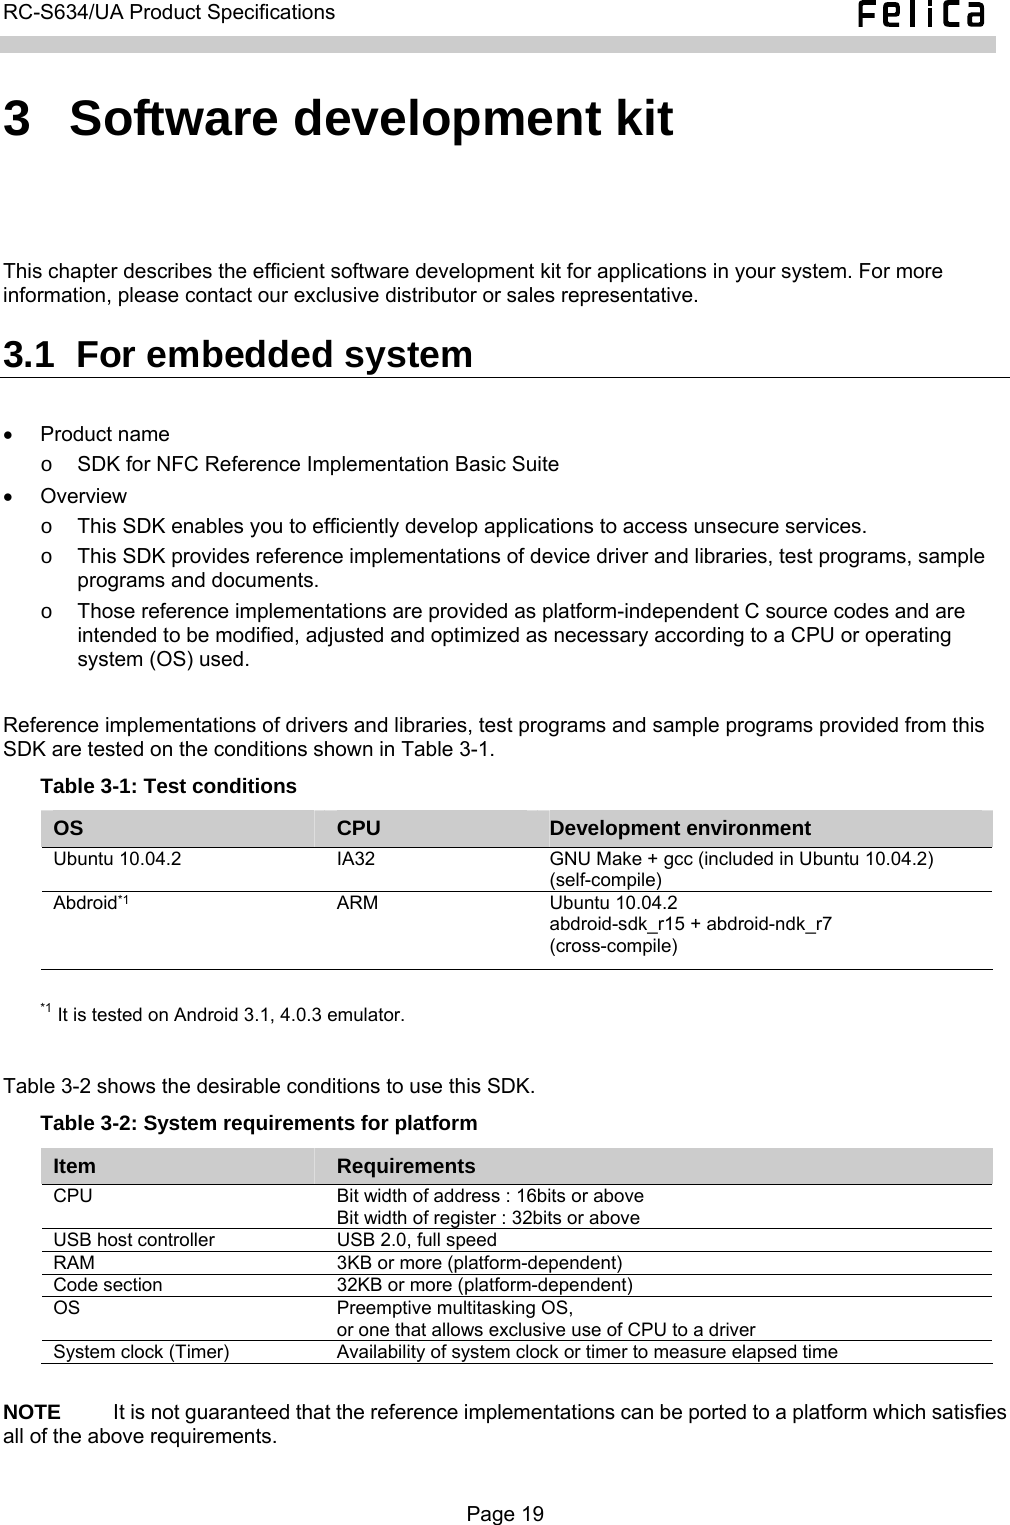   RC-S634/UA Product Specifications  3  Software development kit This chapter describes the efficient software development kit for applications in your system. For more information, please contact our exclusive distributor or sales representative. 3.1  For embedded system  • Product name o  SDK for NFC Reference Implementation Basic Suite • Overview  o  This SDK enables you to efficiently develop applications to access unsecure services. o  This SDK provides reference implementations of device driver and libraries, test programs, sample programs and documents. o  Those reference implementations are provided as platform-independent C source codes and are intended to be modified, adjusted and optimized as necessary according to a CPU or operating system (OS) used.  Reference implementations of drivers and libraries, test programs and sample programs provided from this SDK are tested on the conditions shown in Table 3-1. Table 3-1: Test conditions OS  CPU  Development environment Ubuntu 10.04.2  IA32  GNU Make + gcc (included in Ubuntu 10.04.2) (self-compile) Abdroid*1 ARM Ubuntu 10.04.2 abdroid-sdk_r15 + abdroid-ndk_r7 (cross-compile)  *1 It is tested on Android 3.1, 4.0.3 emulator.  Table 3-2 shows the desirable conditions to use this SDK. Table 3-2: System requirements for platform Item  Requirements CPU    Bit width of address : 16bits or above Bit width of register : 32bits or above USB host controller  USB 2.0, full speed RAM  3KB or more (platform-dependent) Code section  32KB or more (platform-dependent) OS  Preemptive multitasking OS, or one that allows exclusive use of CPU to a driver System clock (Timer)  Availability of system clock or timer to measure elapsed time  NOTE     It is not guaranteed that the reference implementations can be ported to a platform which satisfies all of the above requirements.  Page 19  